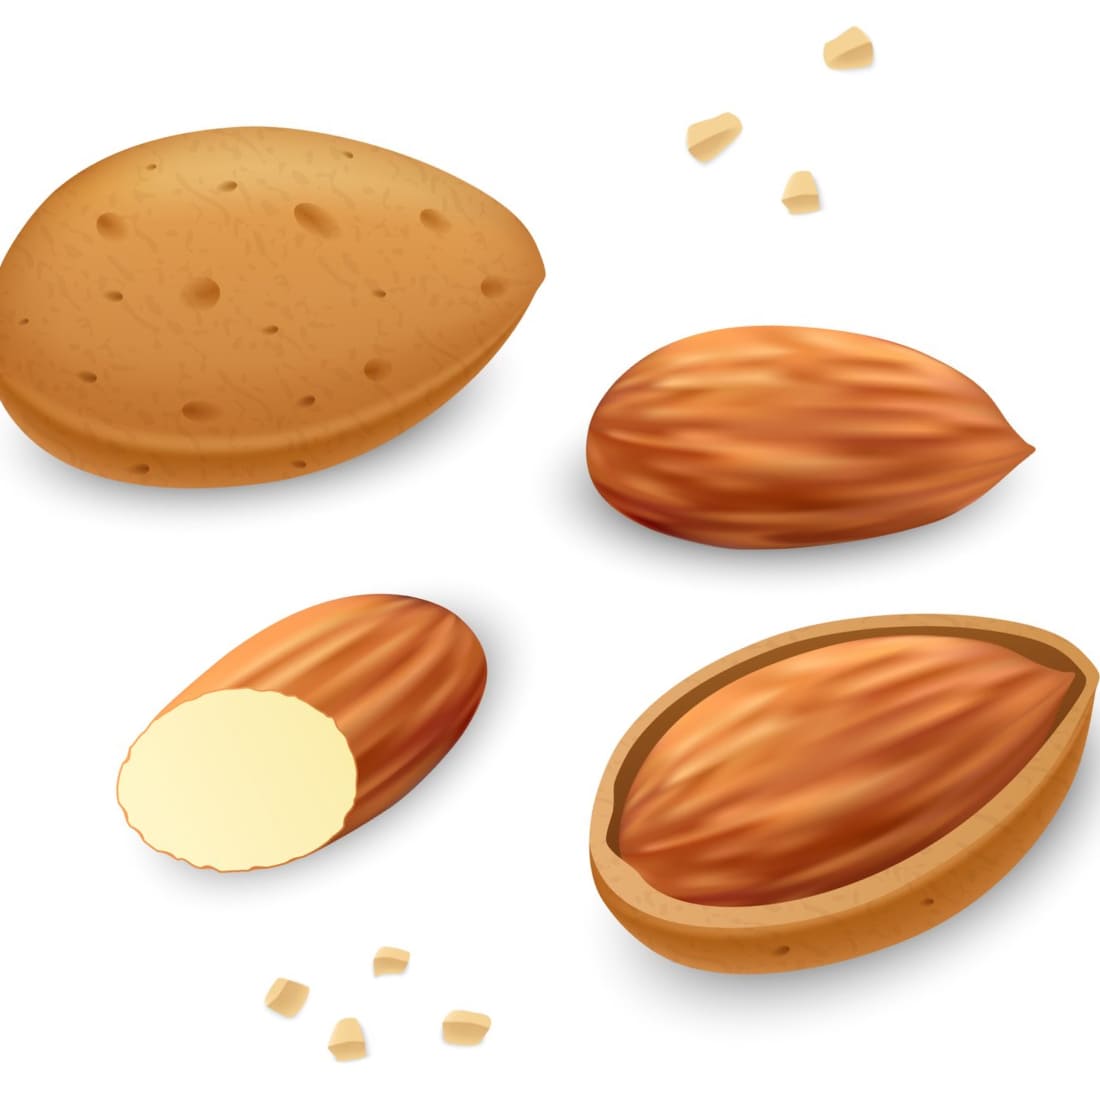 Painted almonds on a white background.